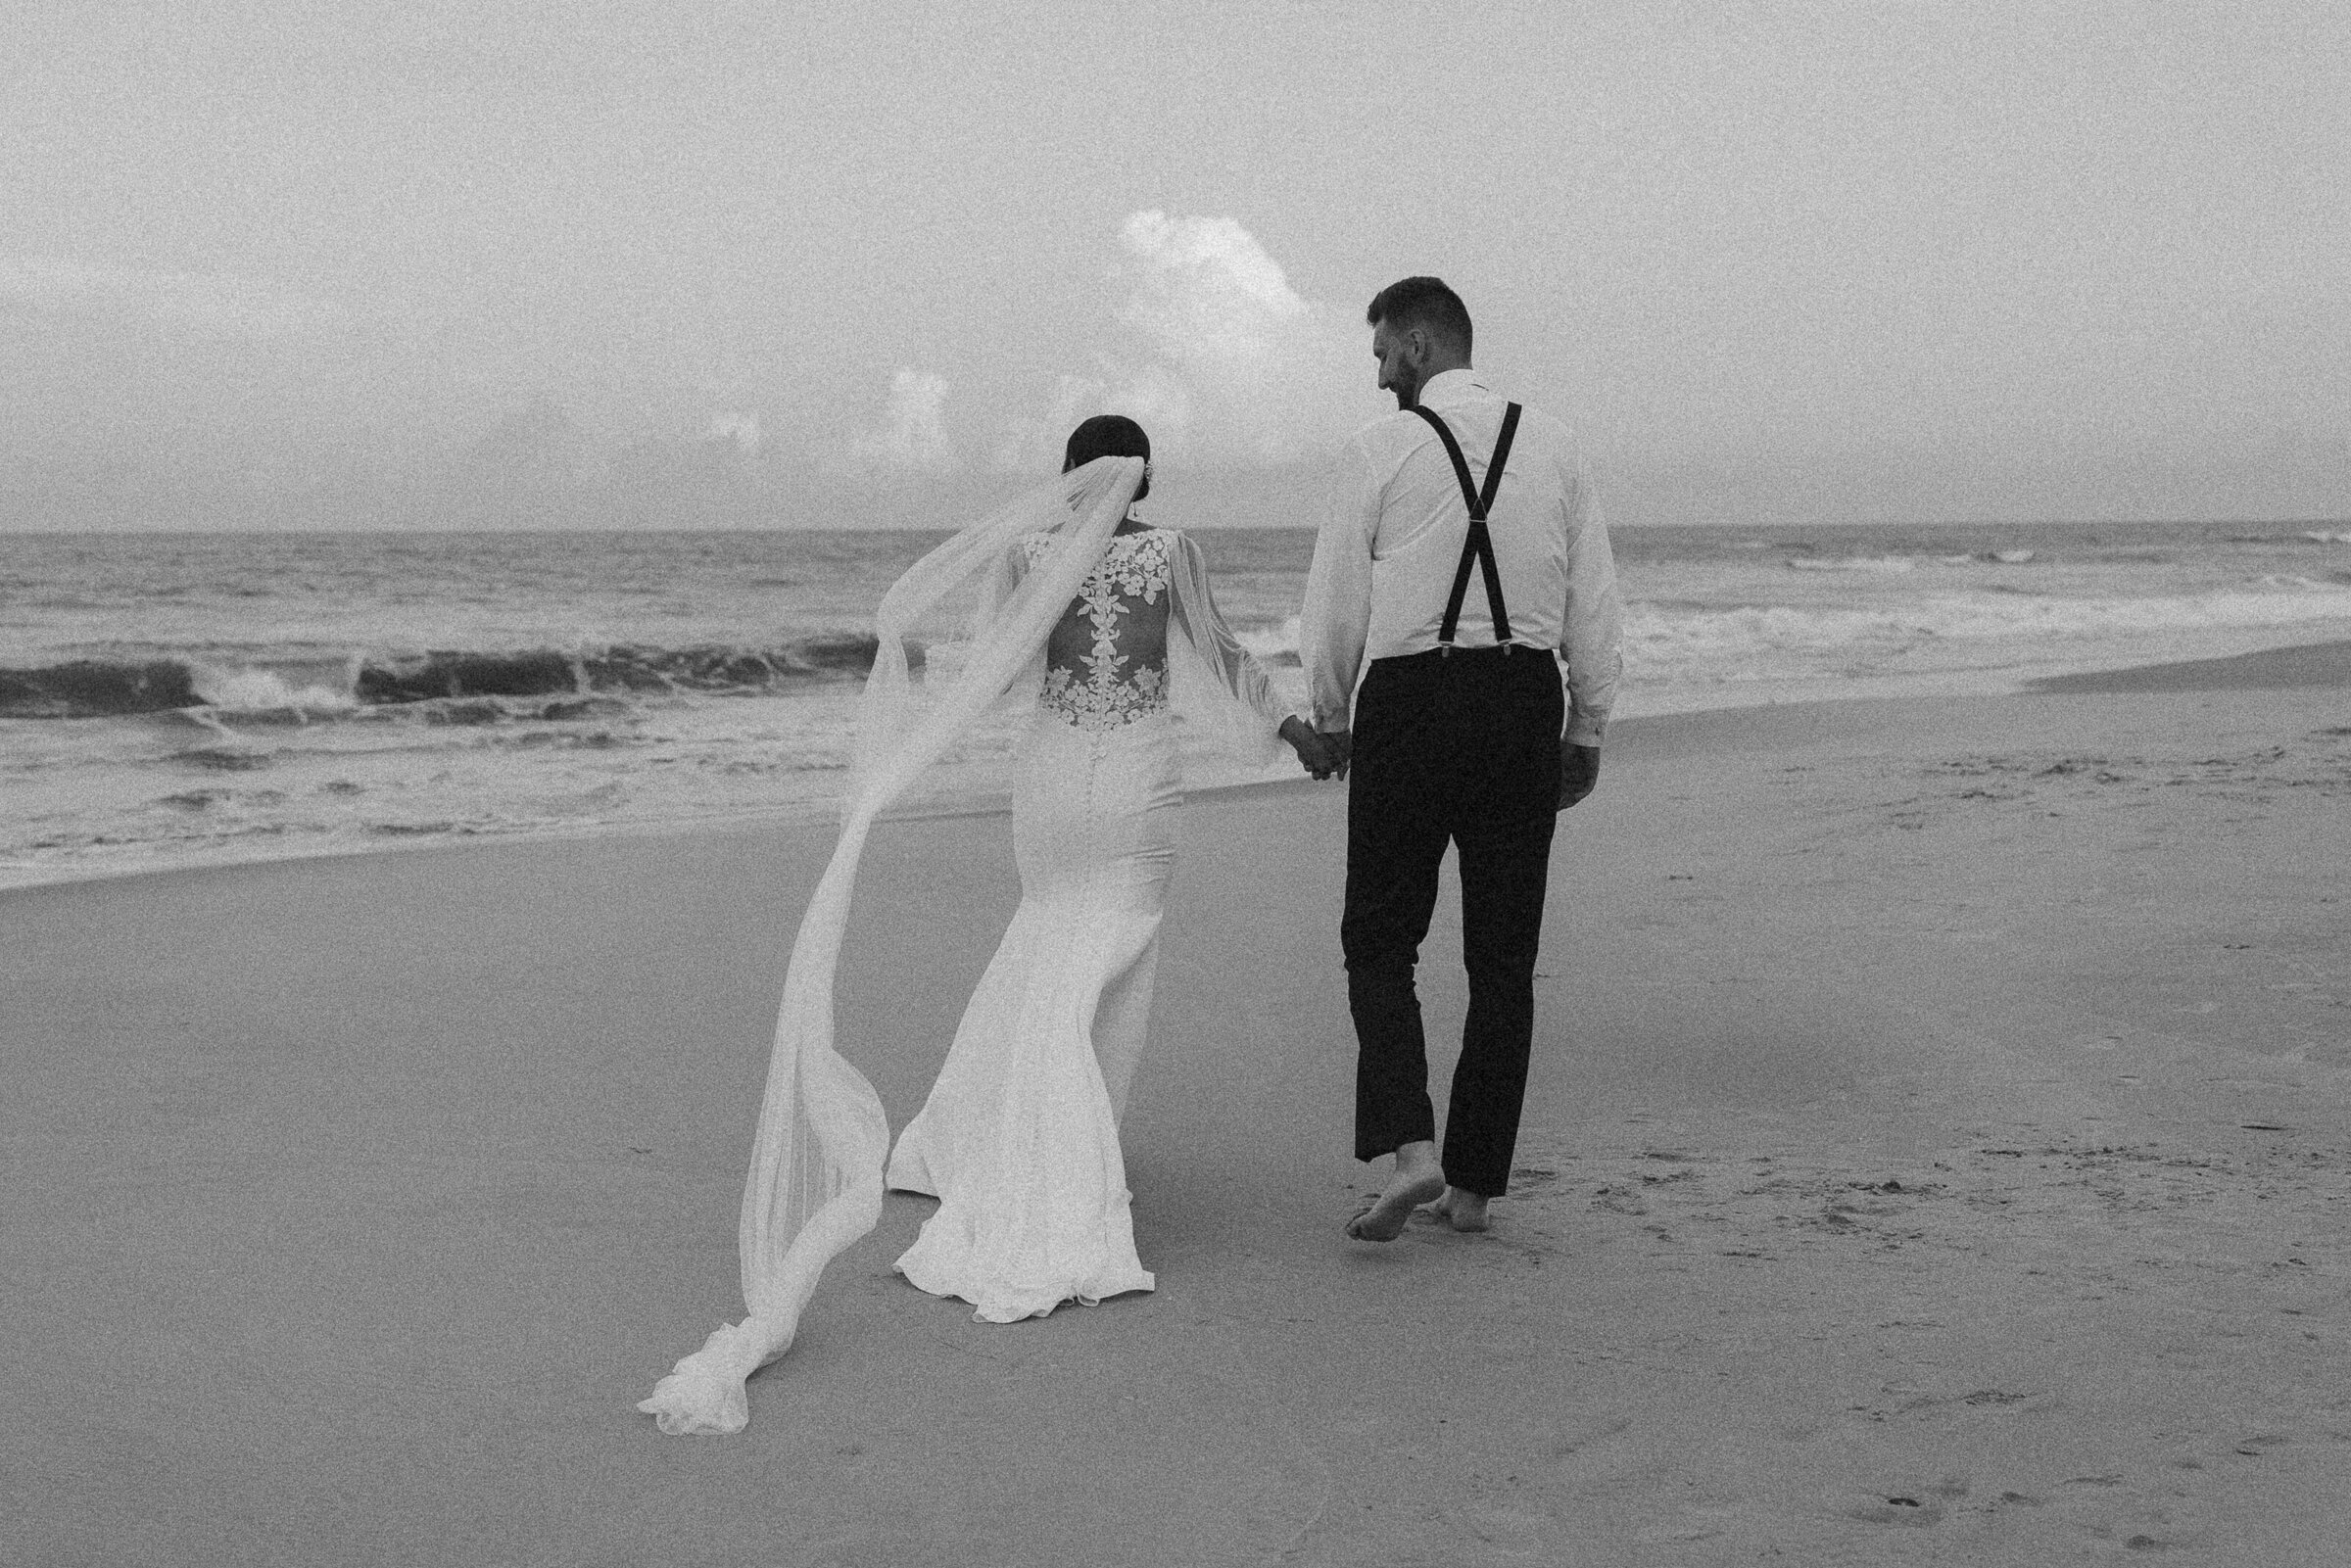 Couple holding hands, walking along the beach in their wedding attire.